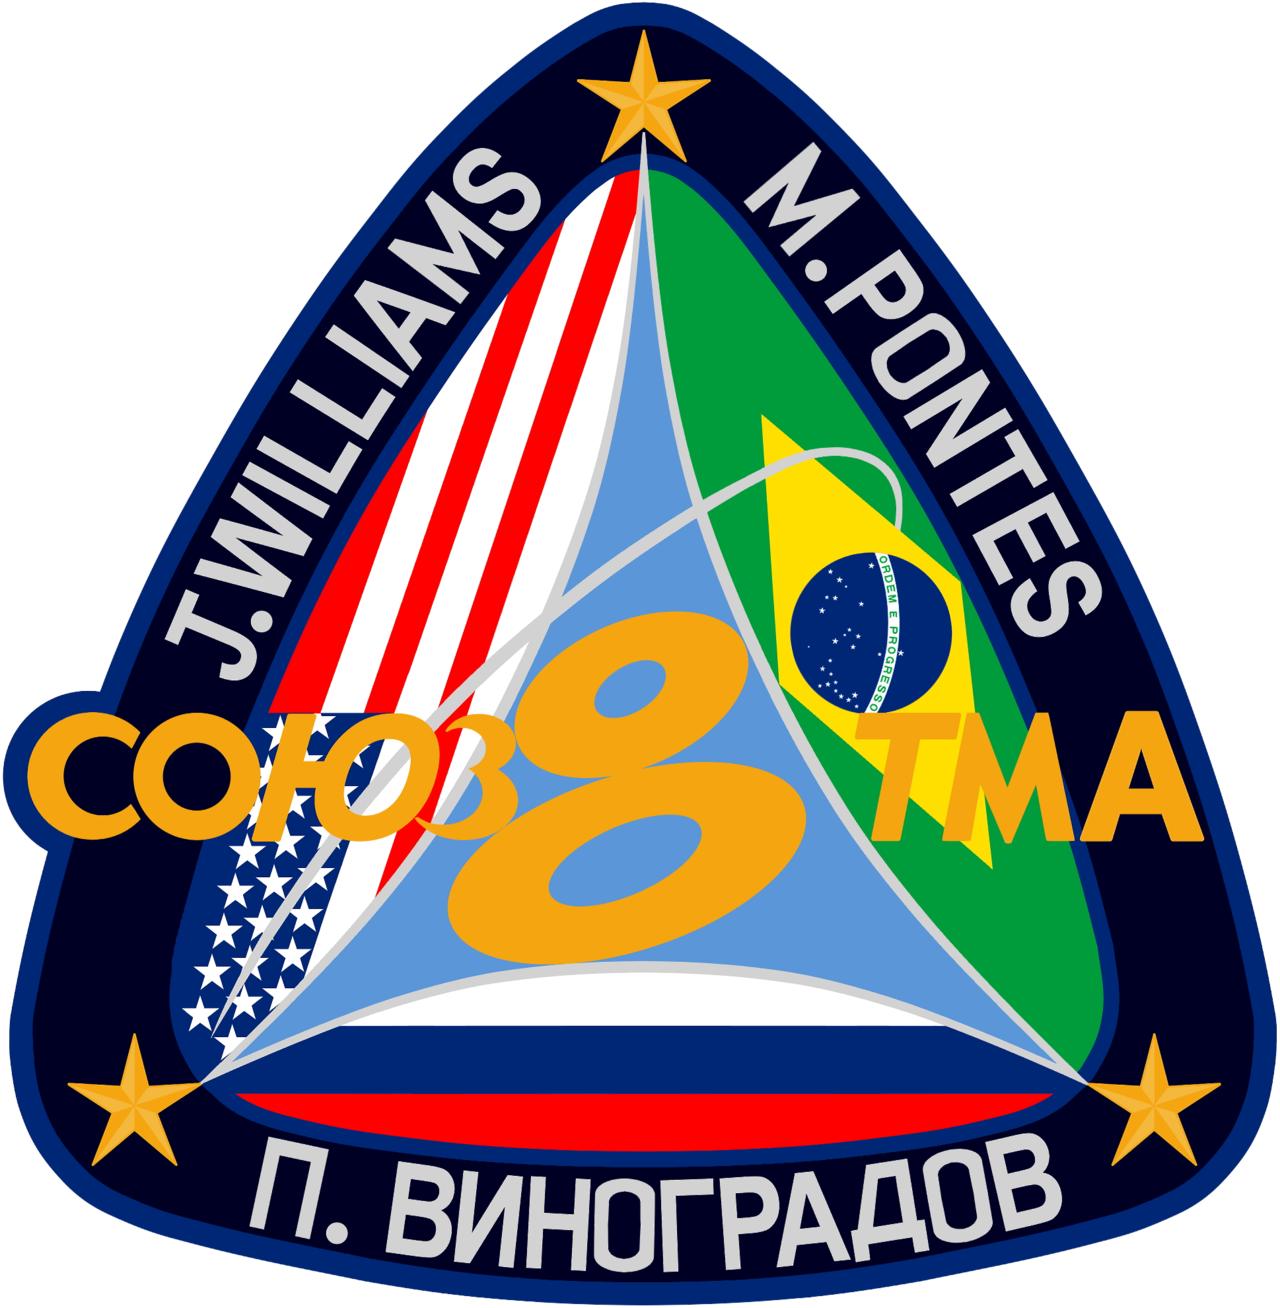 Mission patch for Soyuz TMA-8